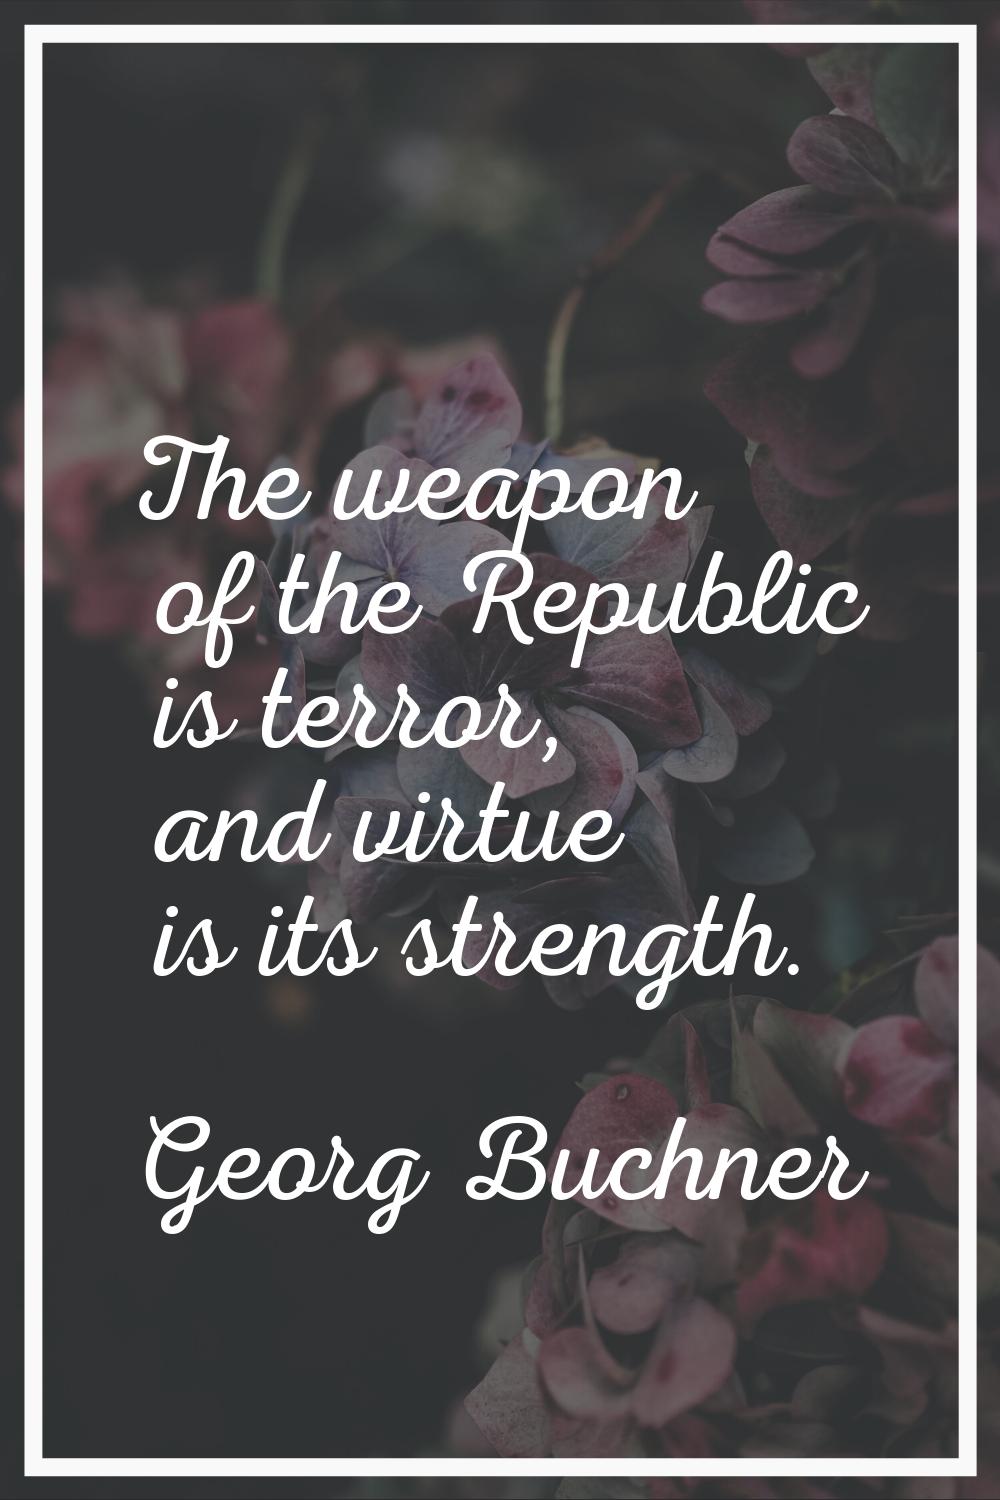 The weapon of the Republic is terror, and virtue is its strength.